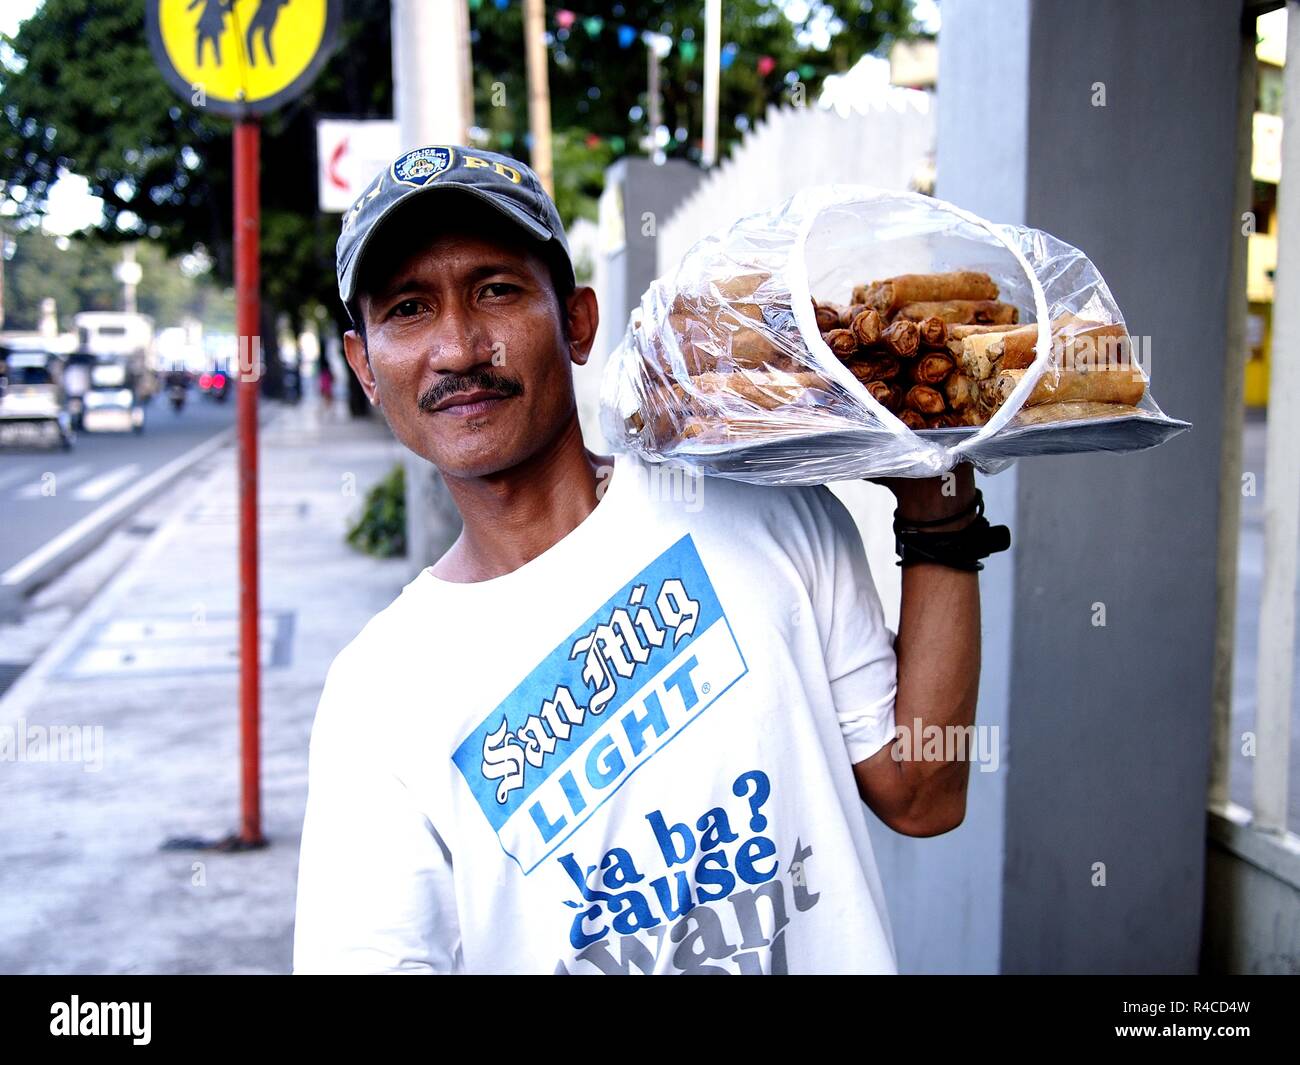 ANTIPOLO CITY, PHILIPPINES - NOVEMBER 24, 2018: A food vendor peddles deep fried vegetable rolls along a busy street. Stock Photo